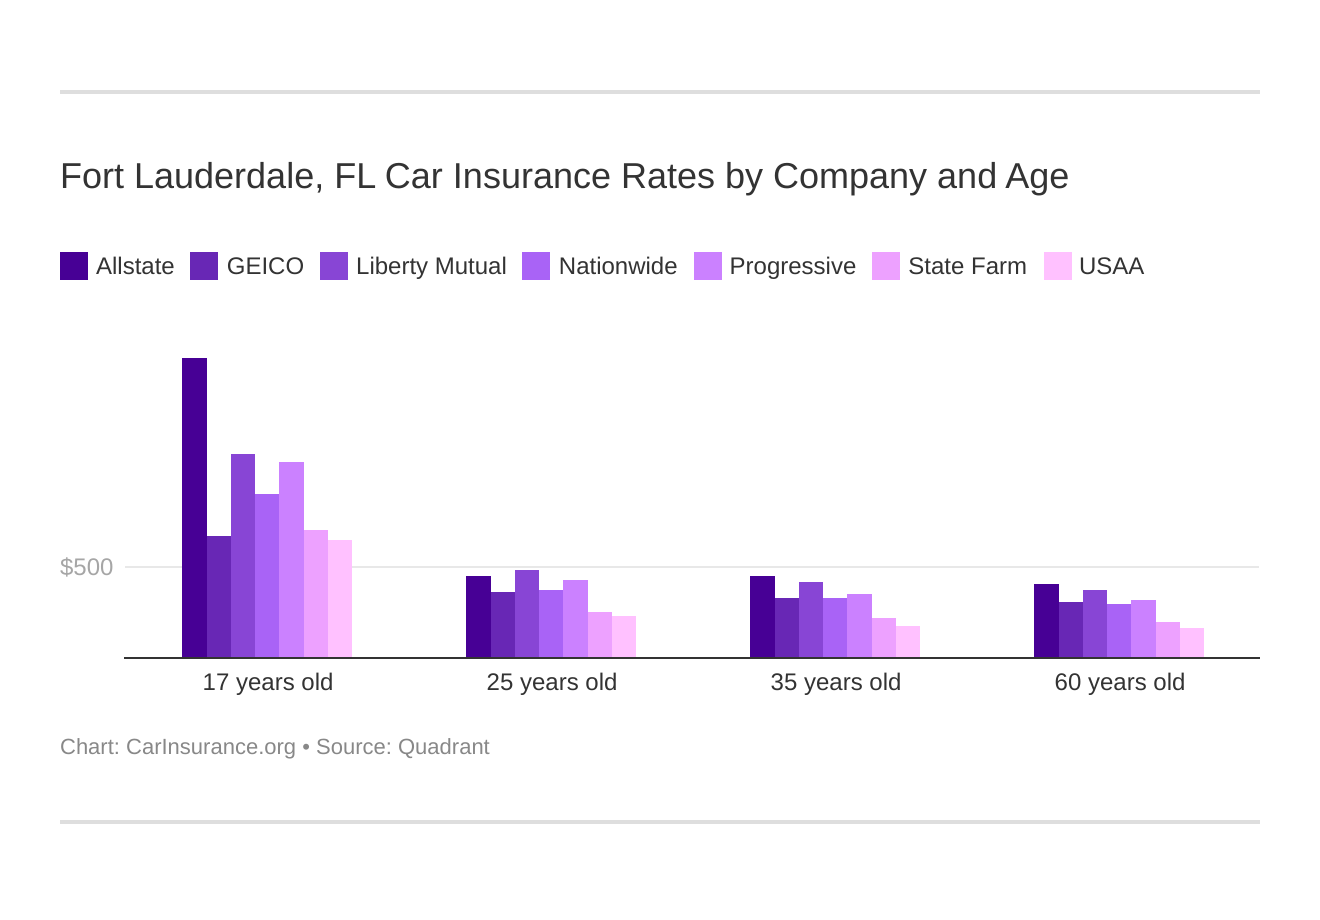 Fort Lauderdale, FL Car Insurance Rates by Company and Age